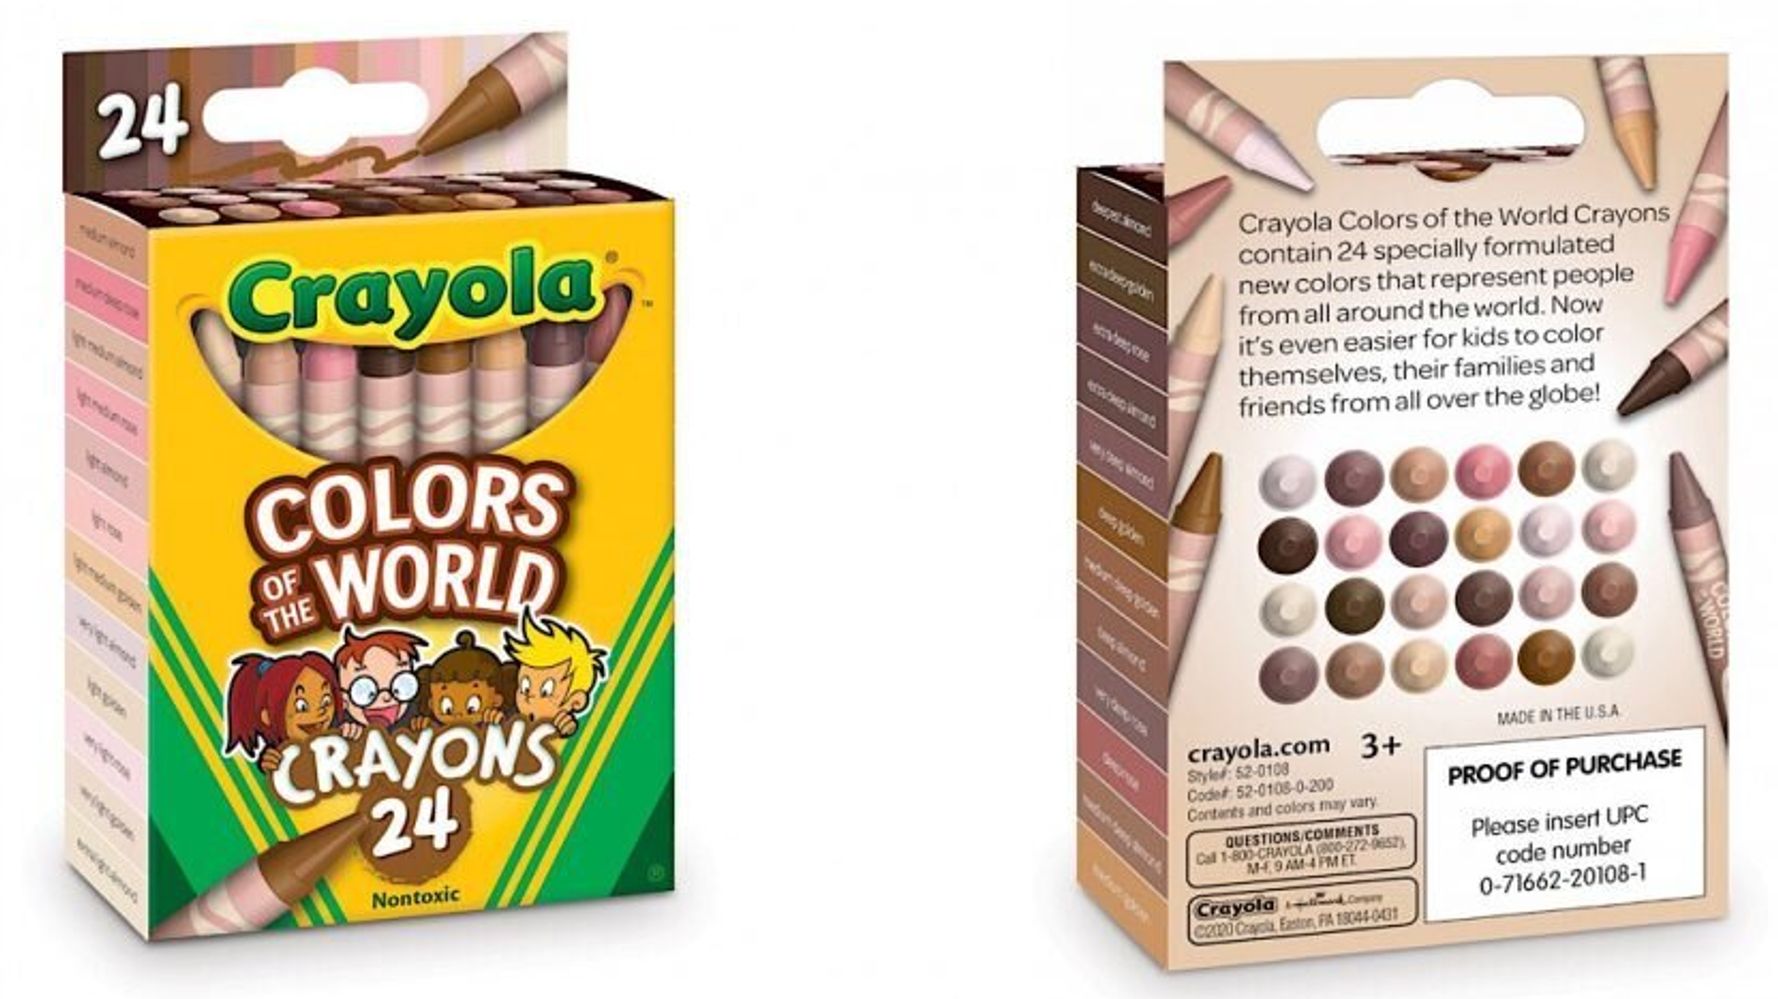 Crayola launches 'Colors of the World' skin tone crayons - Chicago Sun-Times